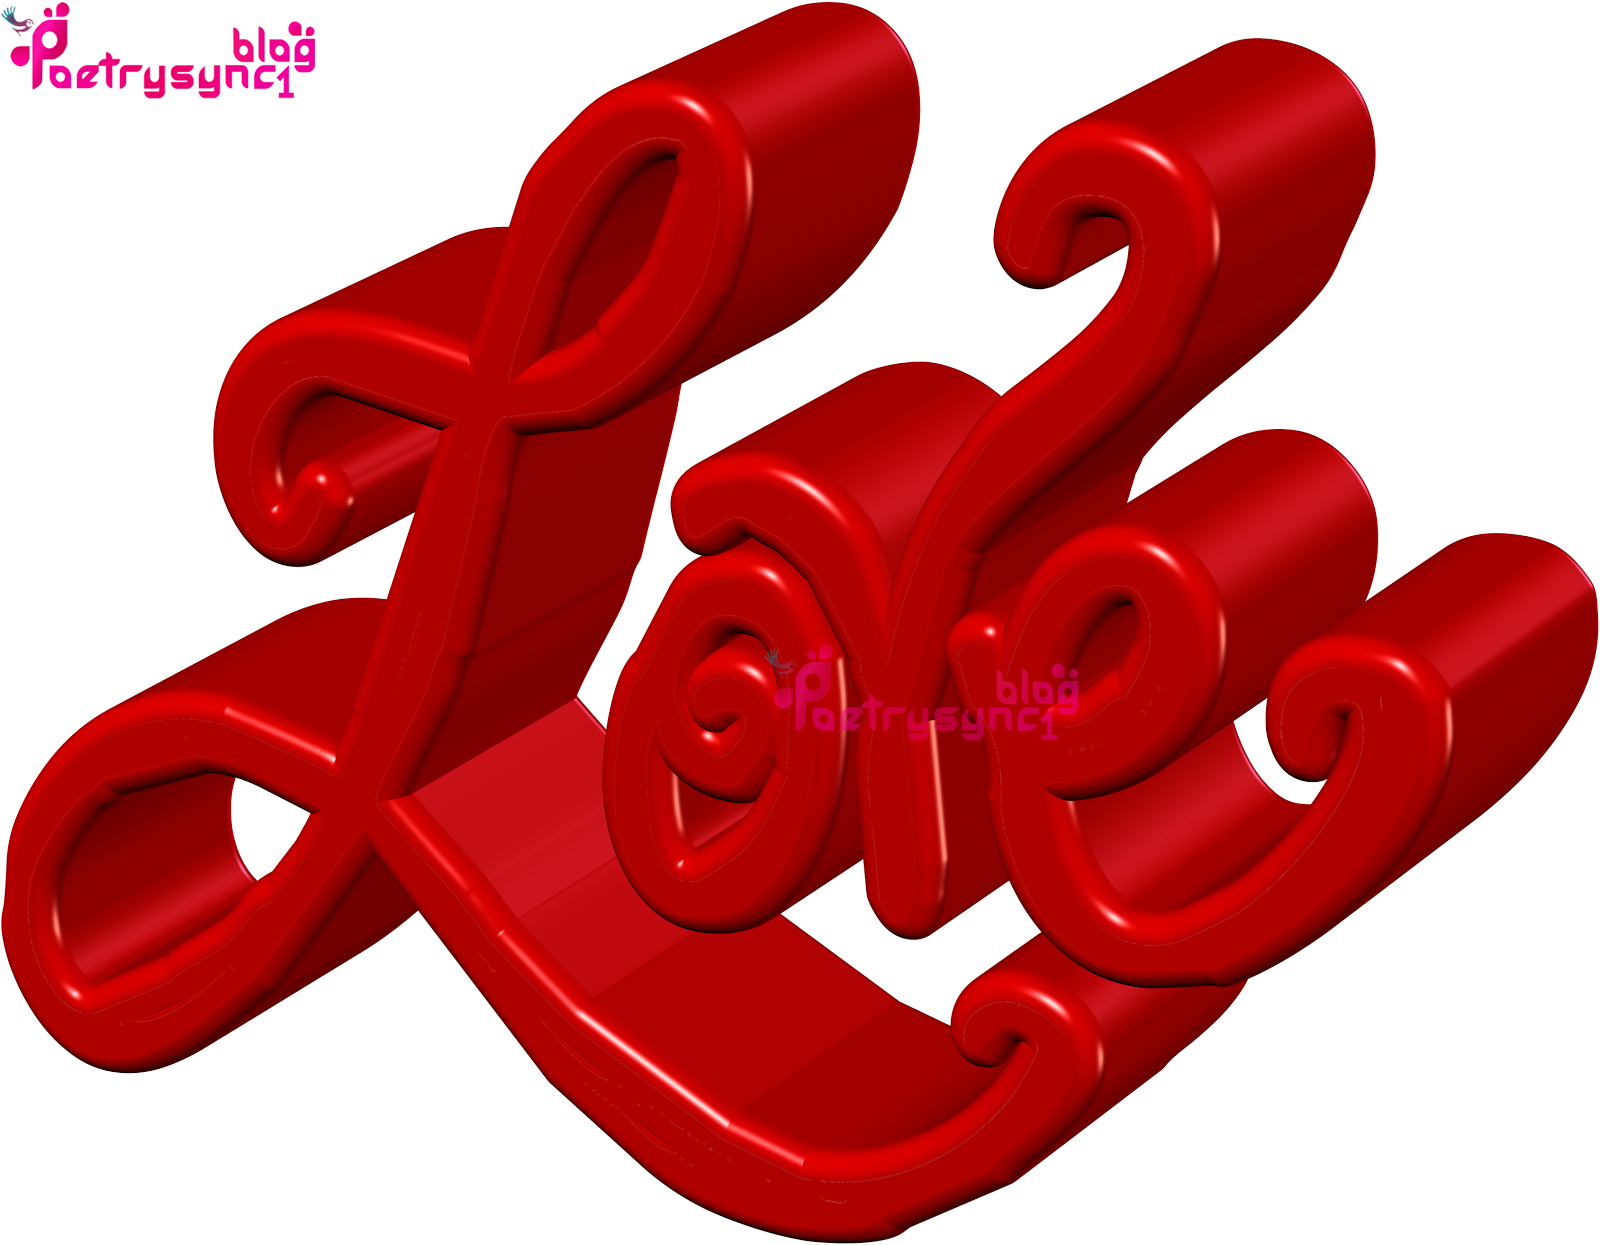 Love-Wallpaper-In-Red-Colour-By-Poetrysync1.blog